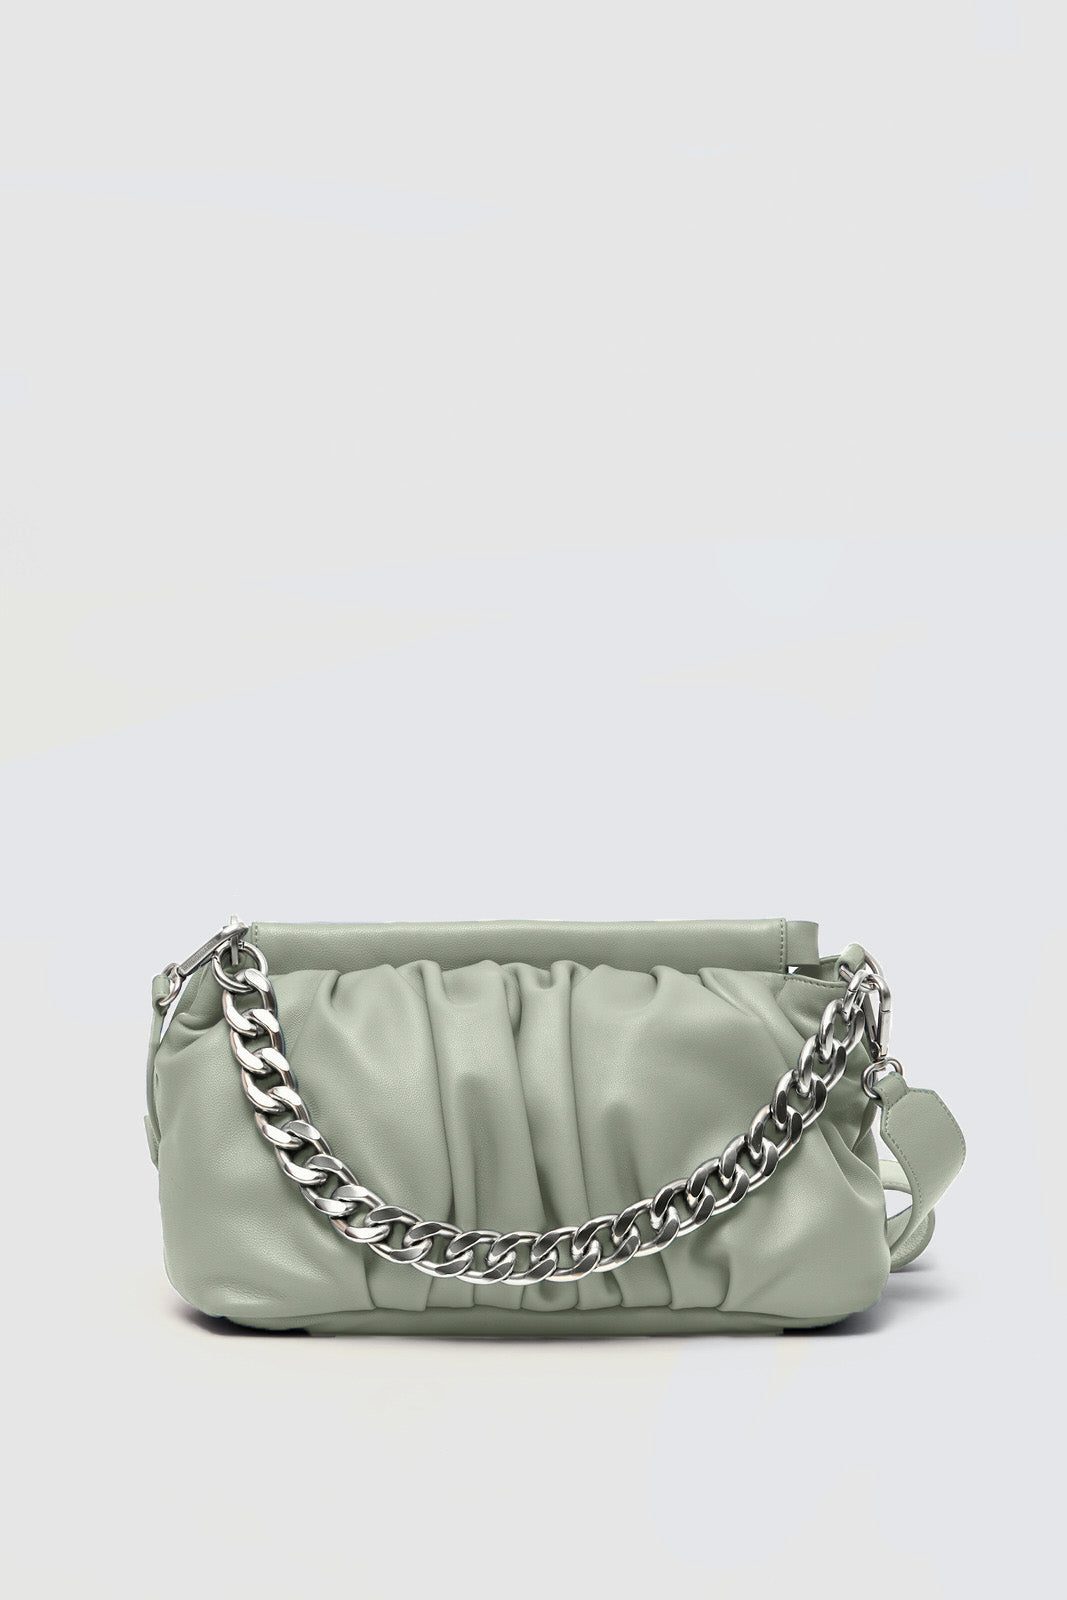 Les Visionnaires-ARCHIVE-SALE-LUCY SILKY-Bags-pear green-OS-ARCHIVIST